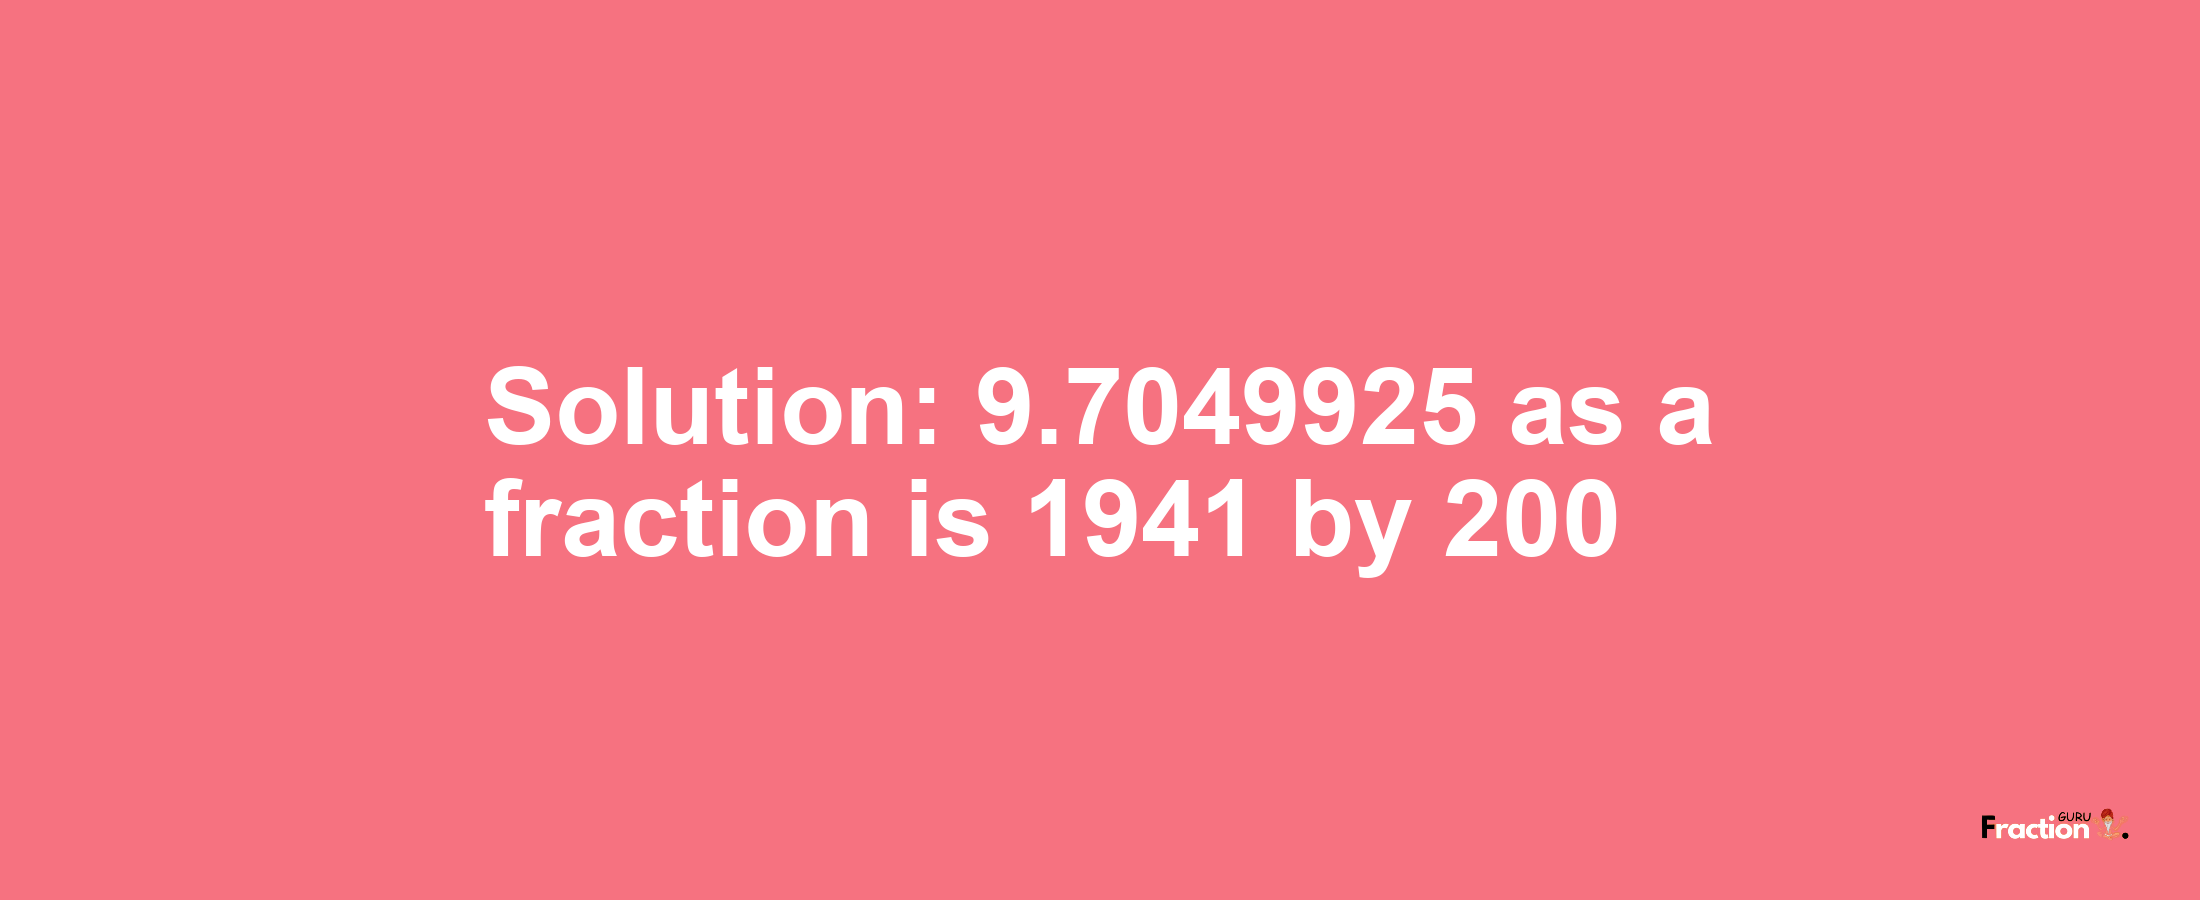 Solution:9.7049925 as a fraction is 1941/200